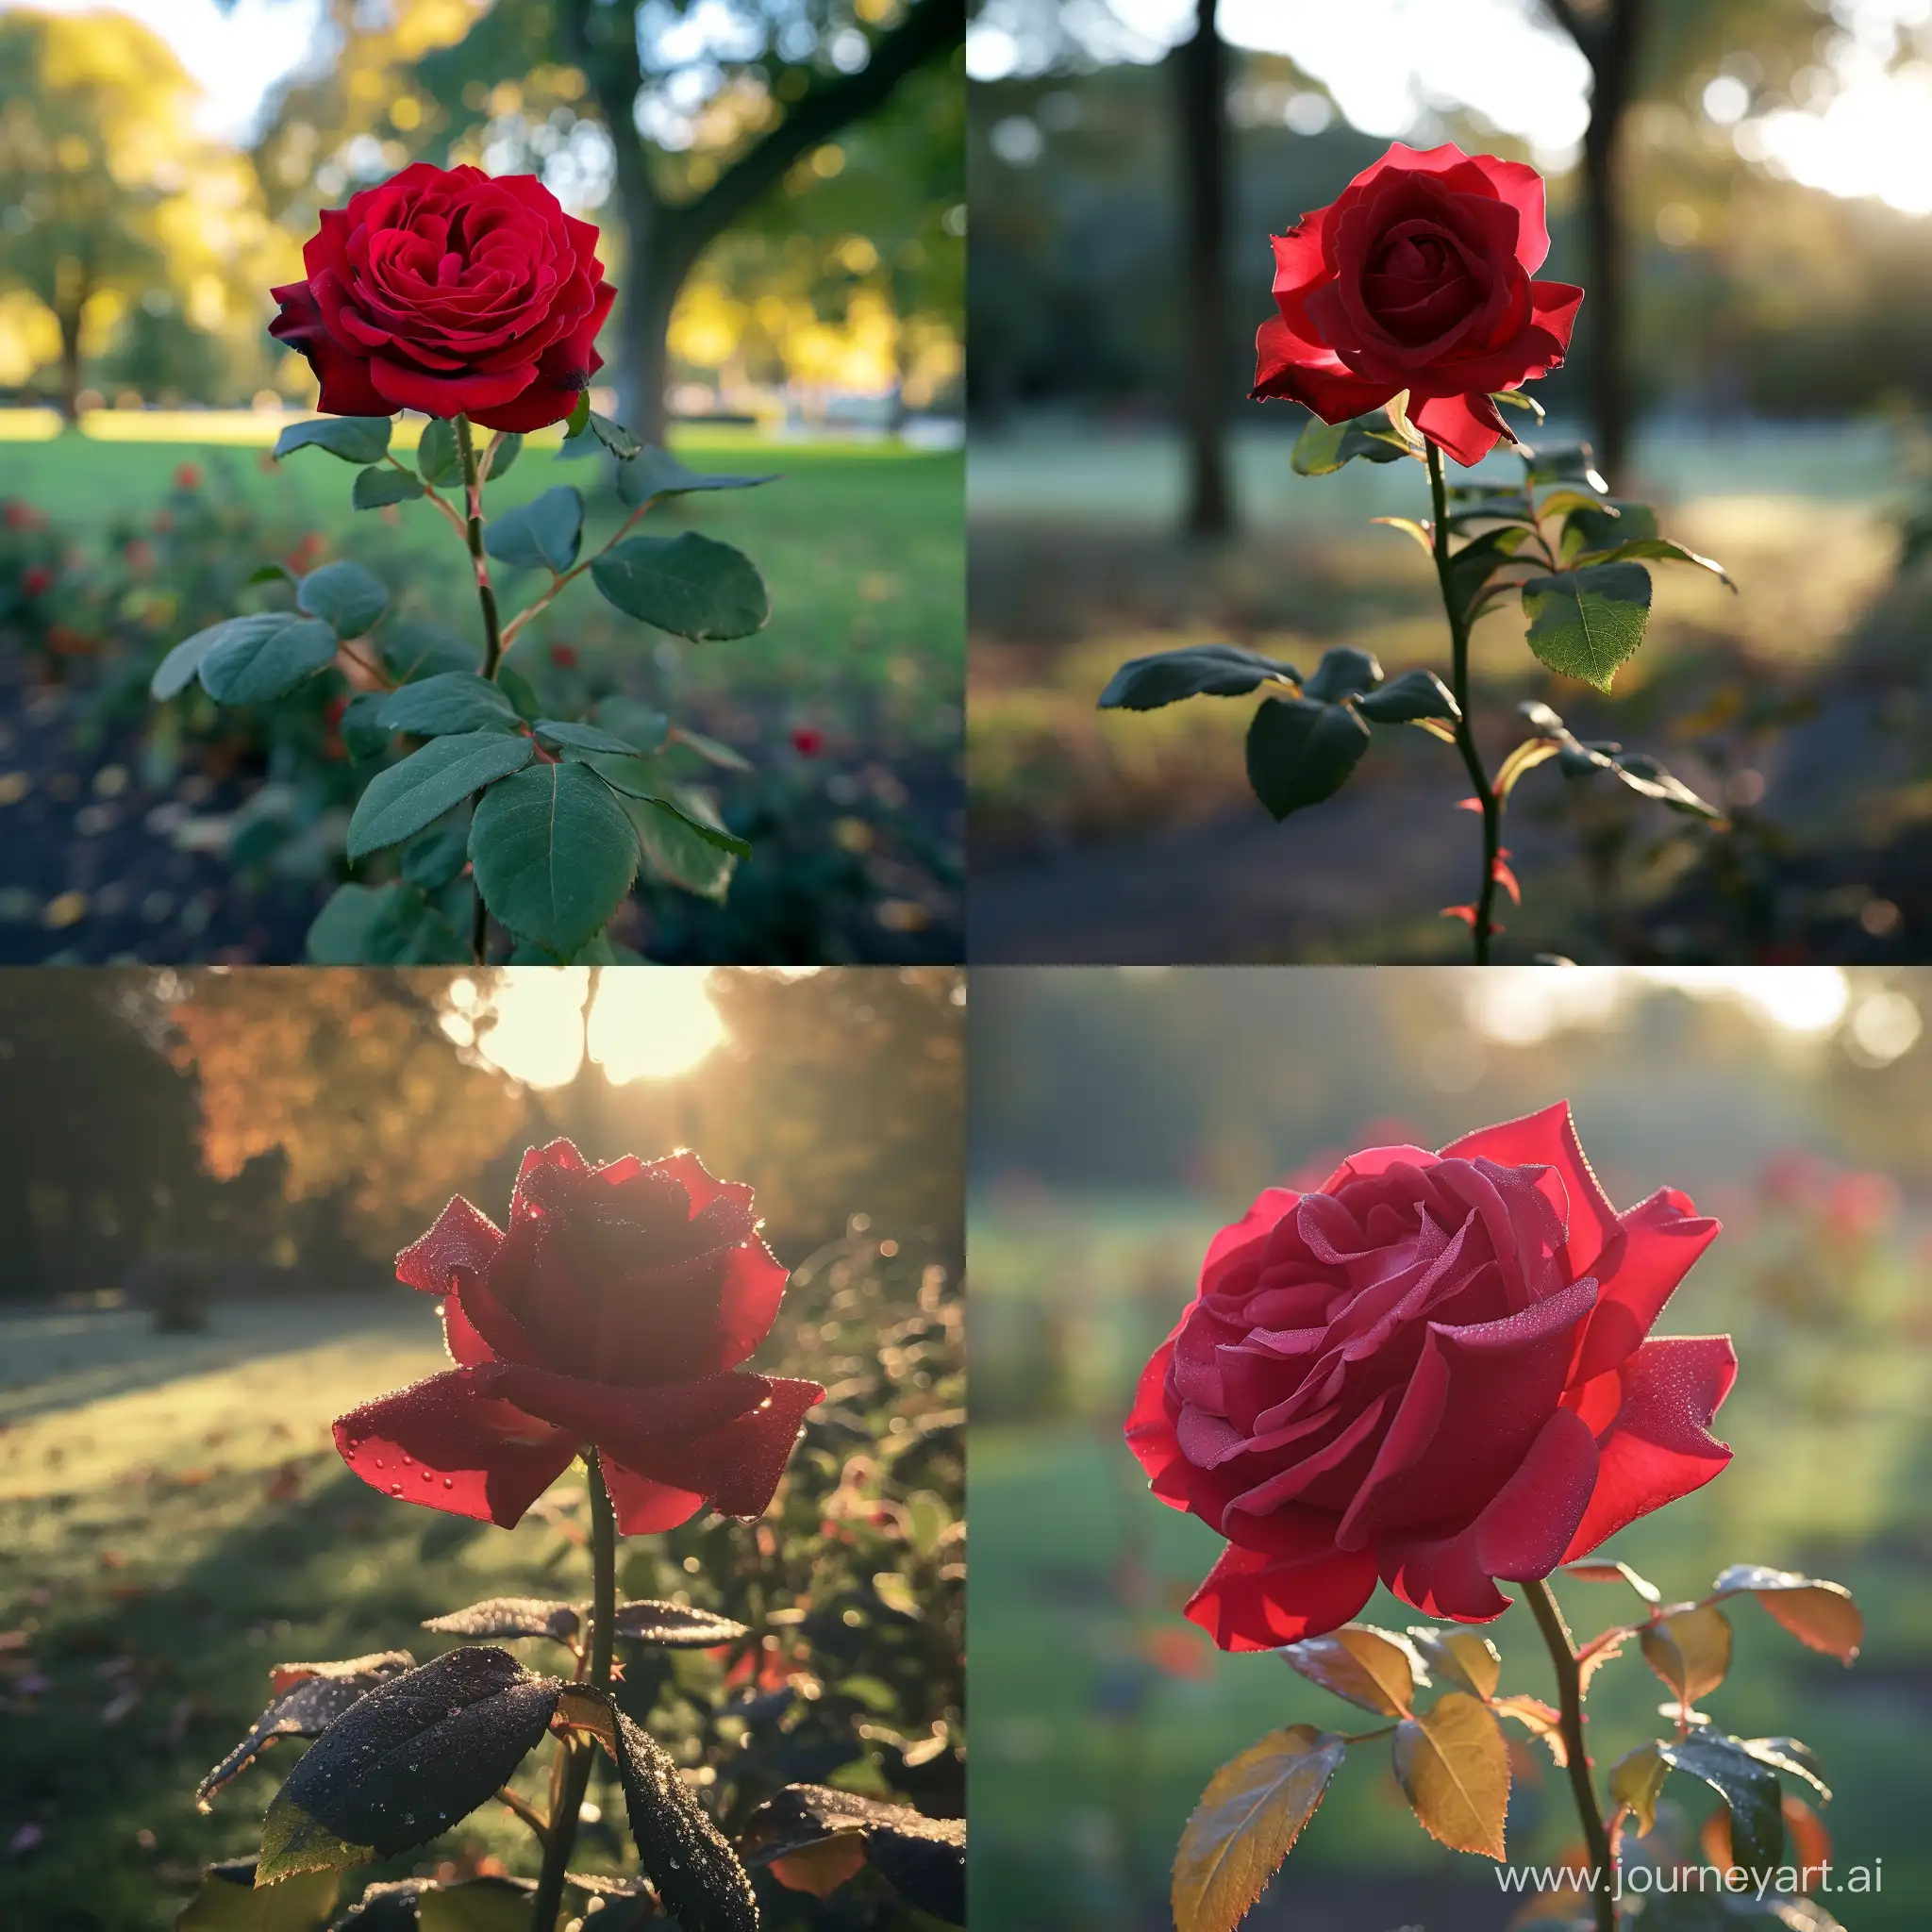 Morning-Serenity-Rose-Blooms-in-Park-at-Cinematic-Dawn